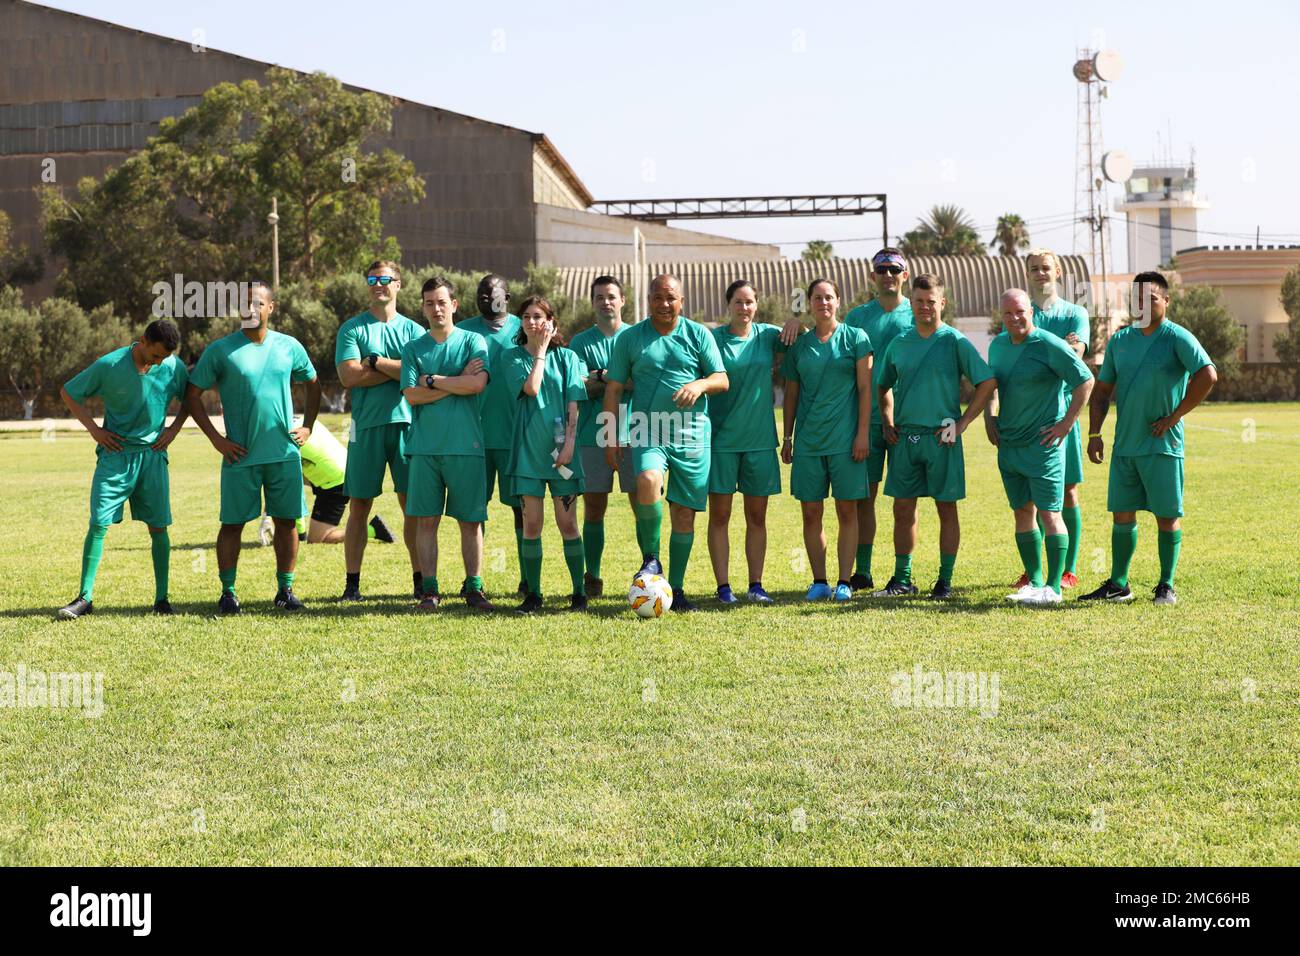 Players clad in green jerseys, one of the four teams participating in a camaraderie-building multinational soccer game during African Lion 22, pose for a group photo at Southern Zone Headquarters, Agadir, Morocco June 25, 2022. African Lion 22 is U.S. Africa Command's largest, premier, joint, annual exercise hosted by Morocco, Ghana, Senegal and Tunisia, June 6 - 30. More than 7,500 participants from 28 nations and NATO train together with a focus on enhancing readiness for U.S. and partner nation forces. AL22 is a joint all-domain, multi-component, and multinational exercise, employing a full Stock Photo